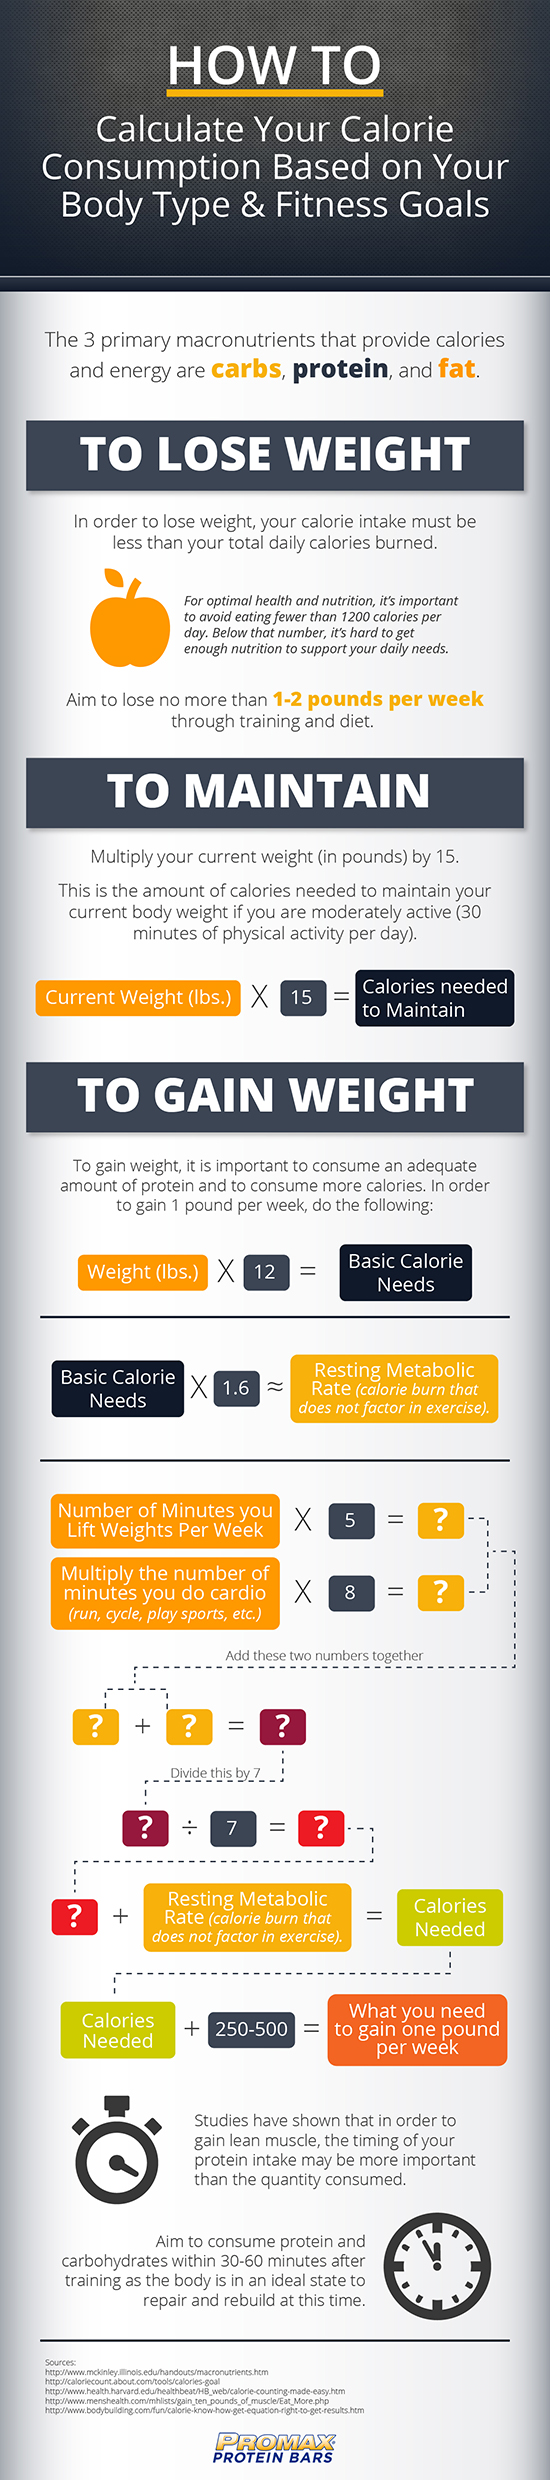 How To Calculate Your Calorie Consumption Based On Your Body Type & Fitness Goals